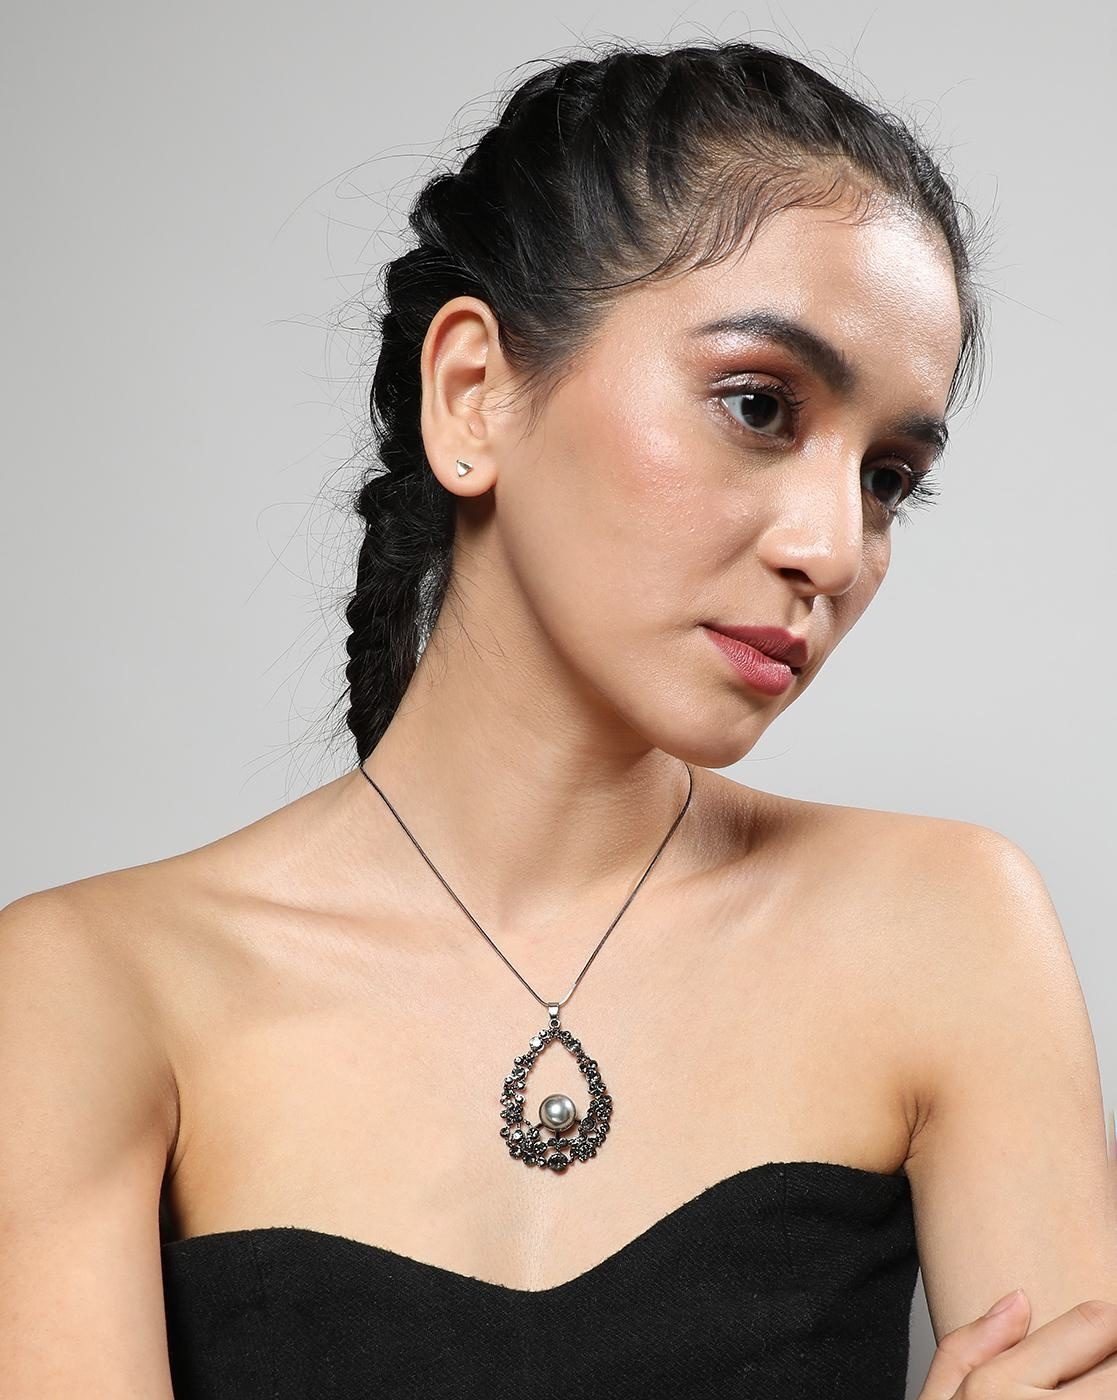 fcity.in - Black Necklace Set / Shimmering Unique Jewellery Sets